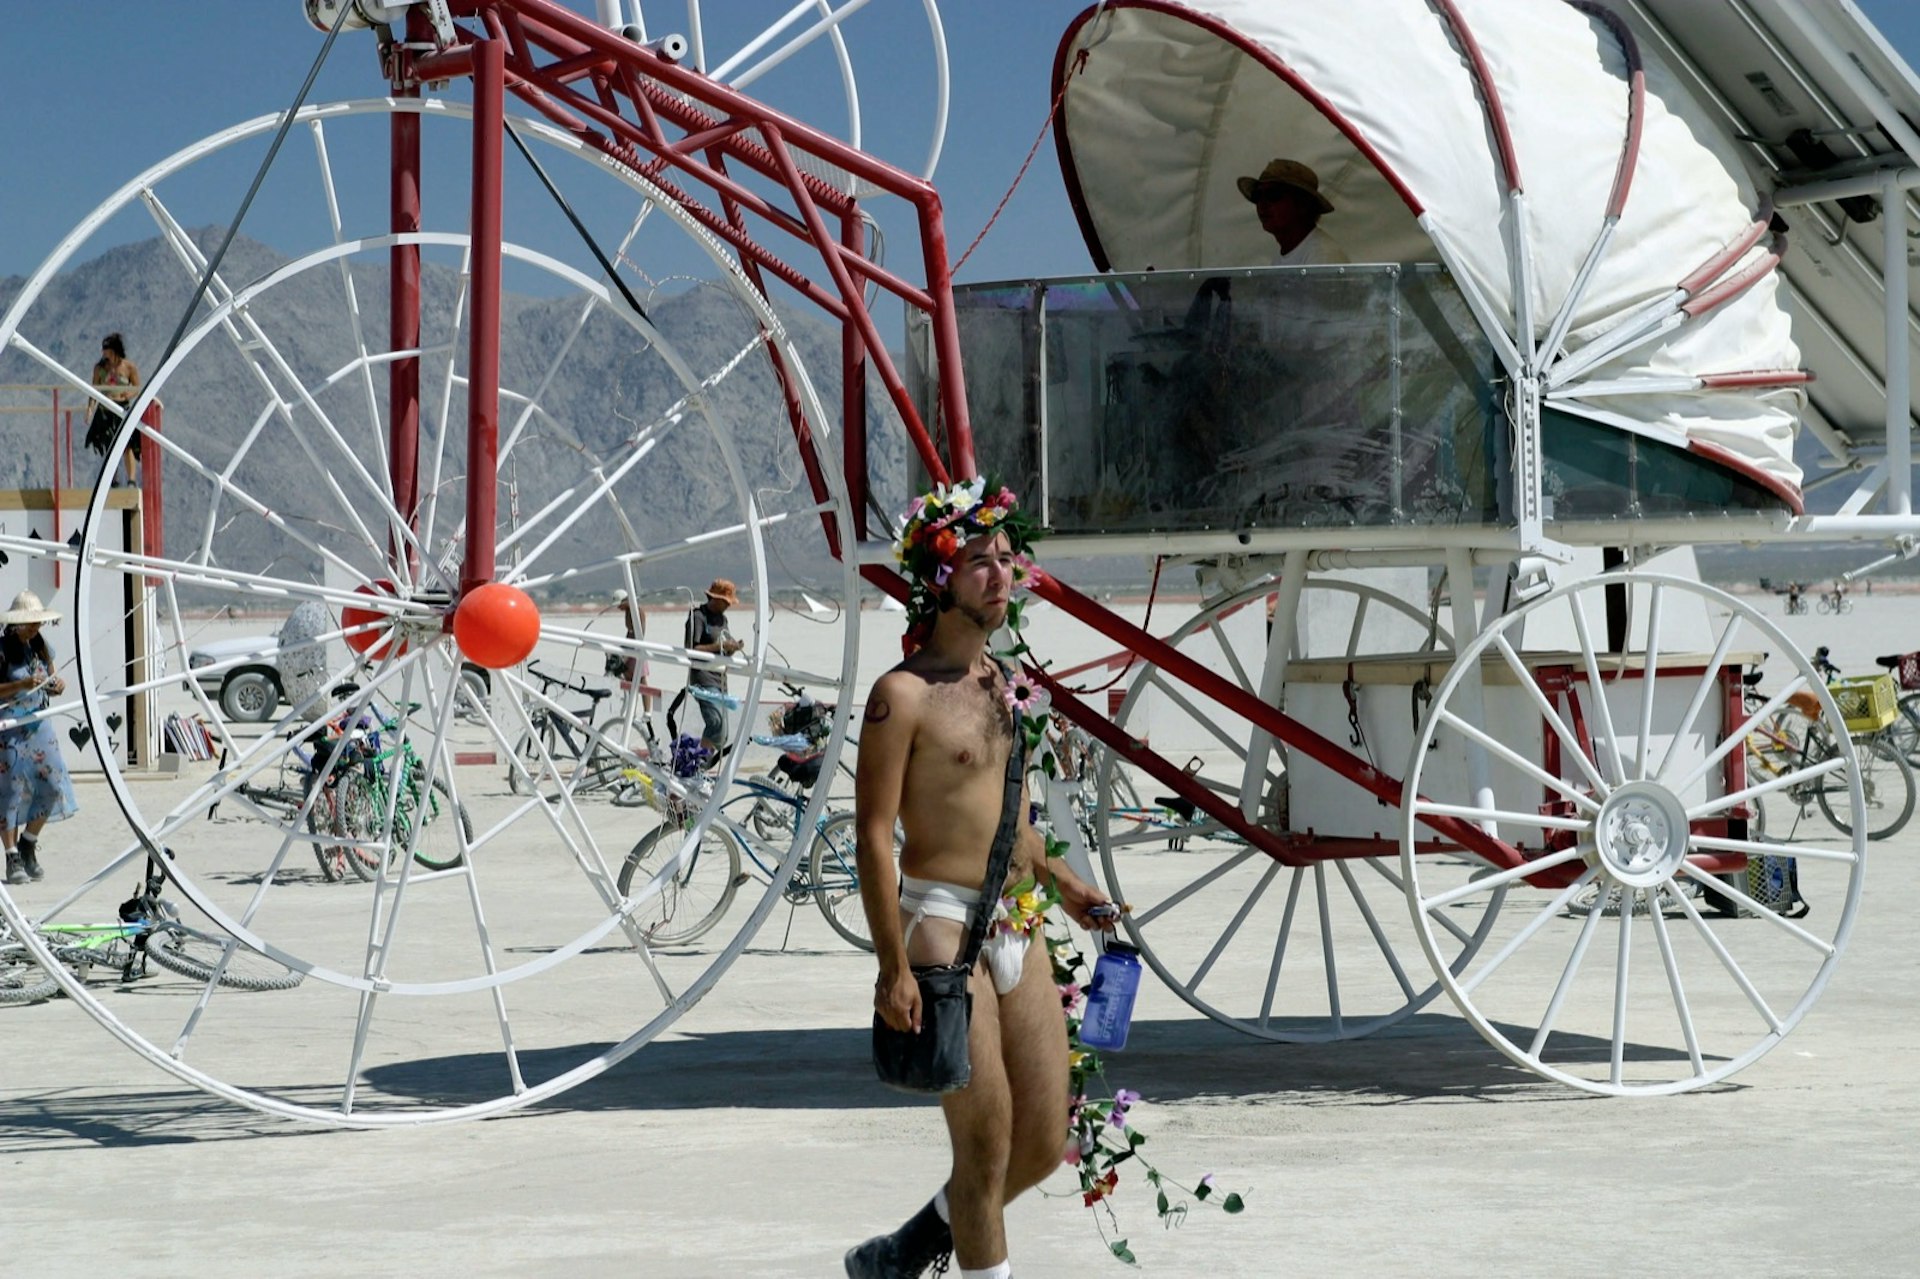 a man wanders past a giant carriage wearing underwear and draped in flowers carrying a water bottle